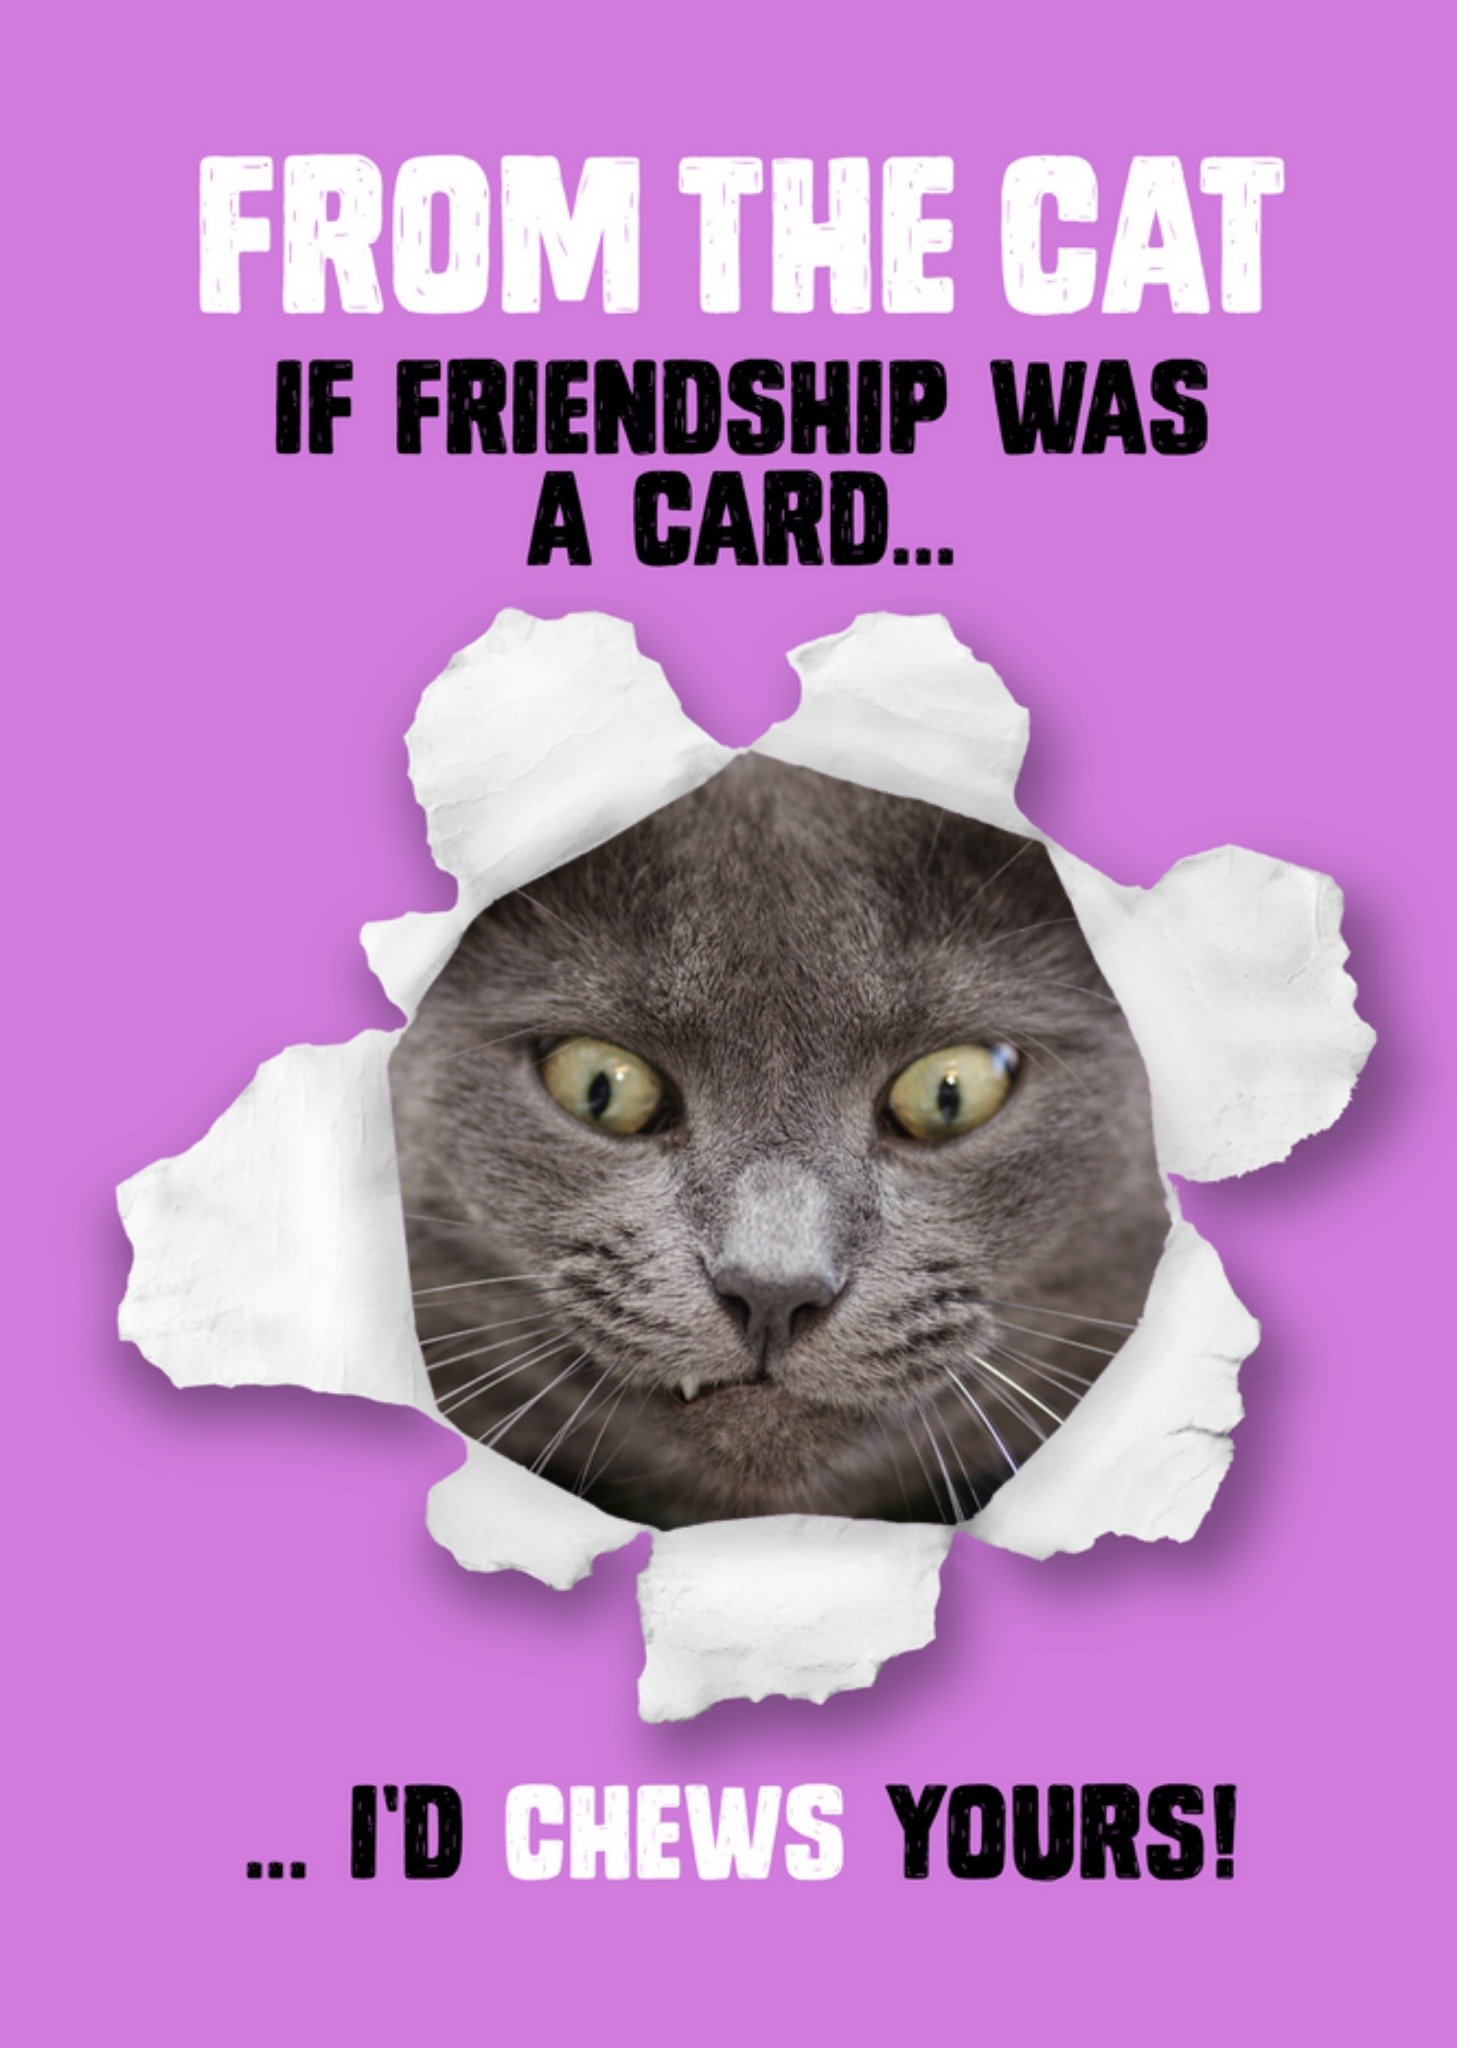 Moonpig If Friendship Was A Card From The Cat Photo Upload Card, Large